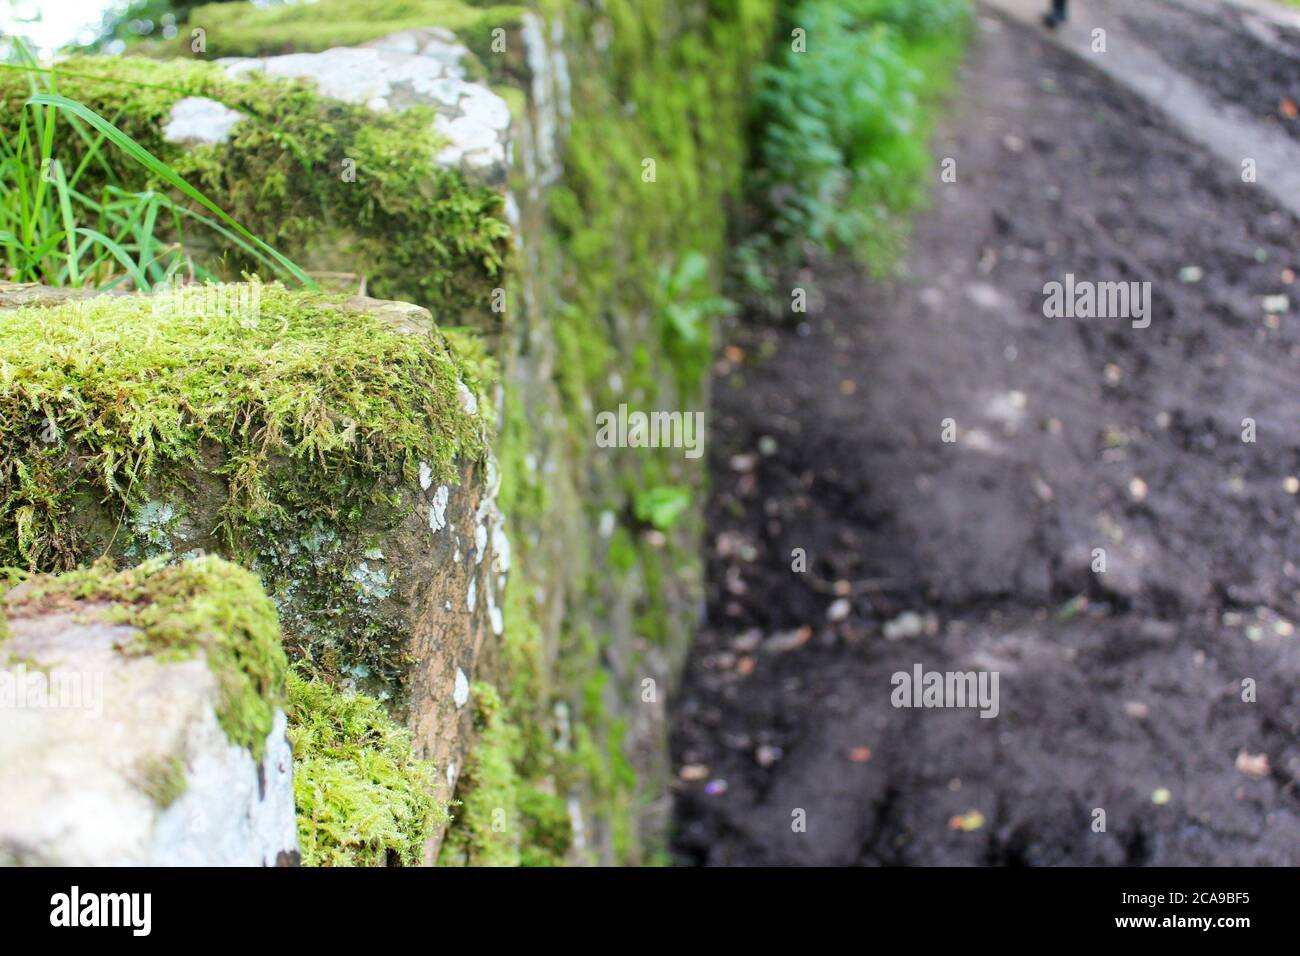 Moss (division Bryophyta) and grass growing on an old stone wall next to a muddy path at Anglezarke, Chorley, England Stock Photo